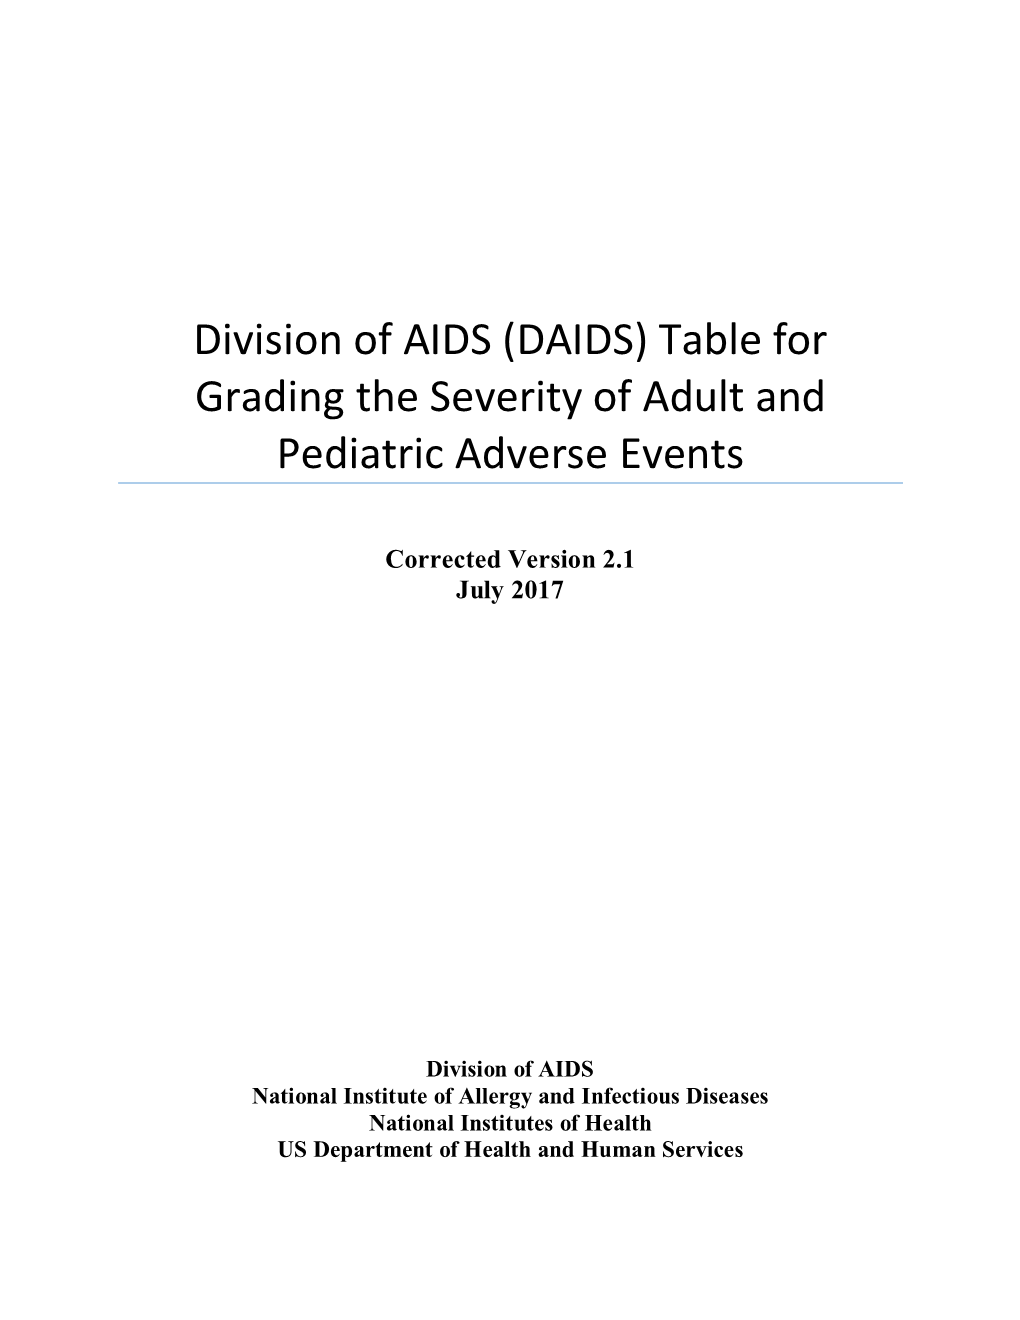 Daids Table for Grading the Severity of Adult and Pediatric Adverse Events